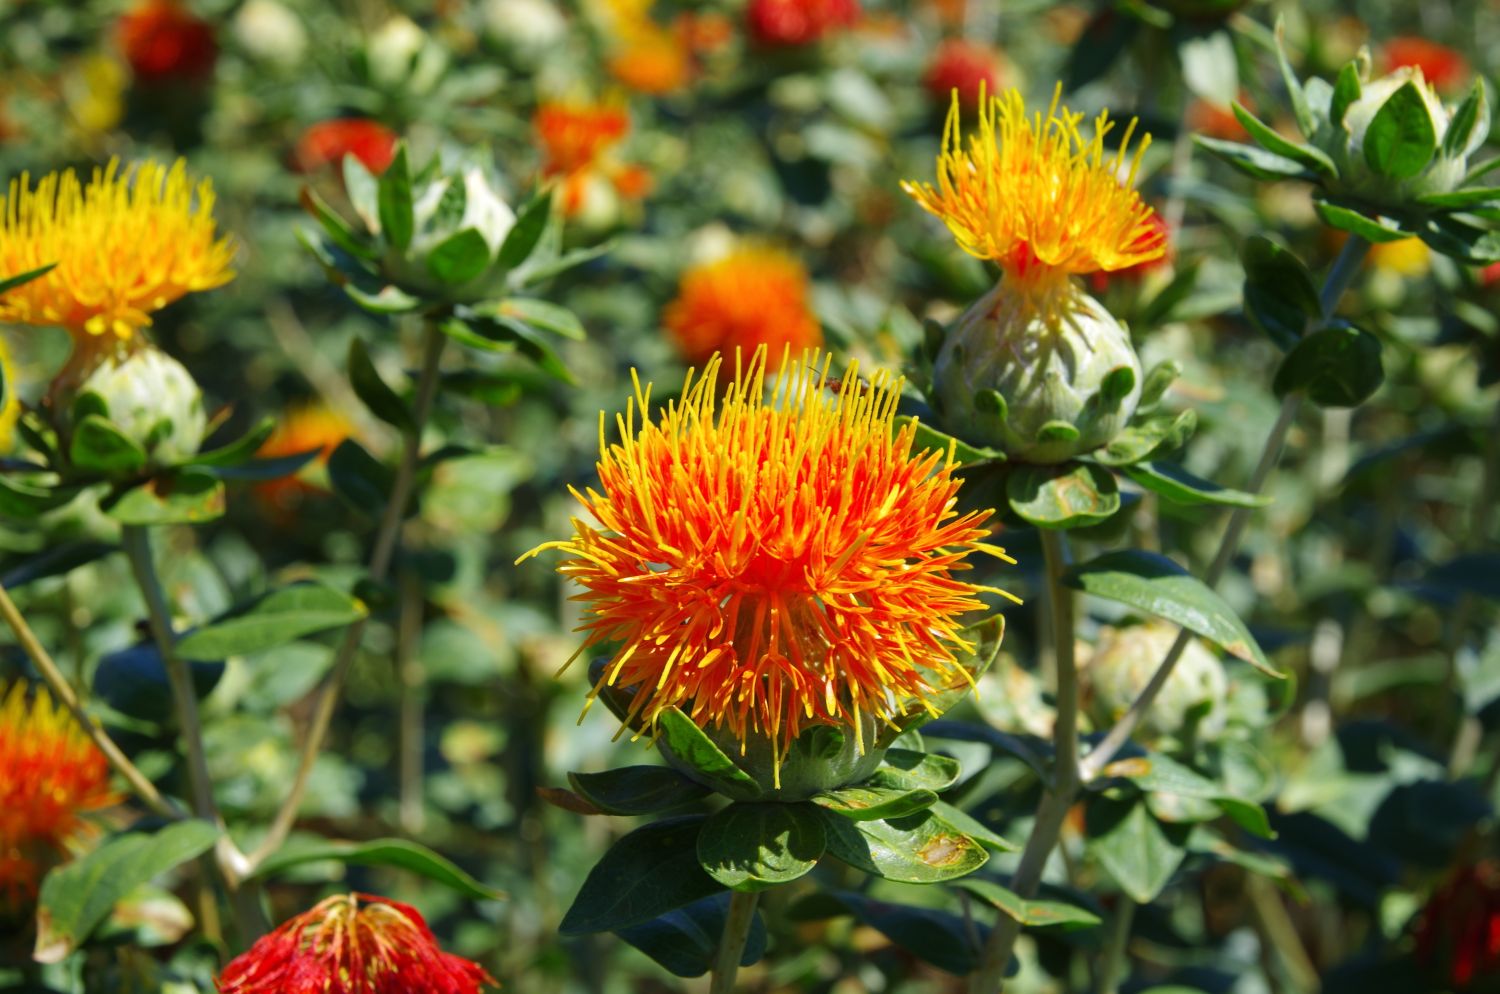 How T Grow Safflower From Seed With Update, Carthamus Tinctorius